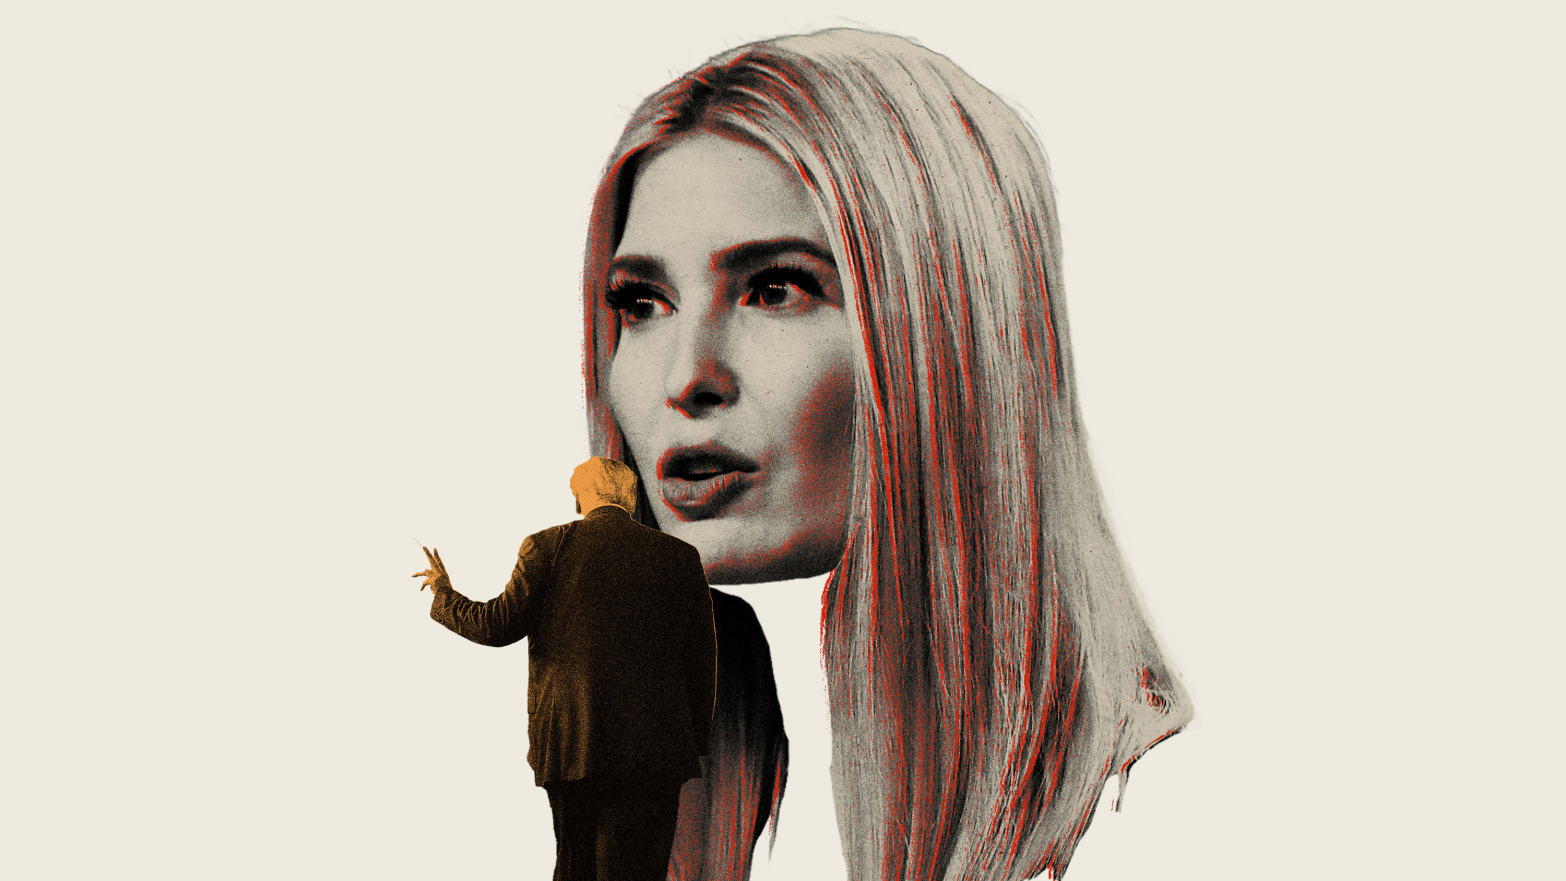 Too Late Regret Porn - Ivanka Had Her Chances to Break With Daddy Trumpâ€”It's Too Late Now